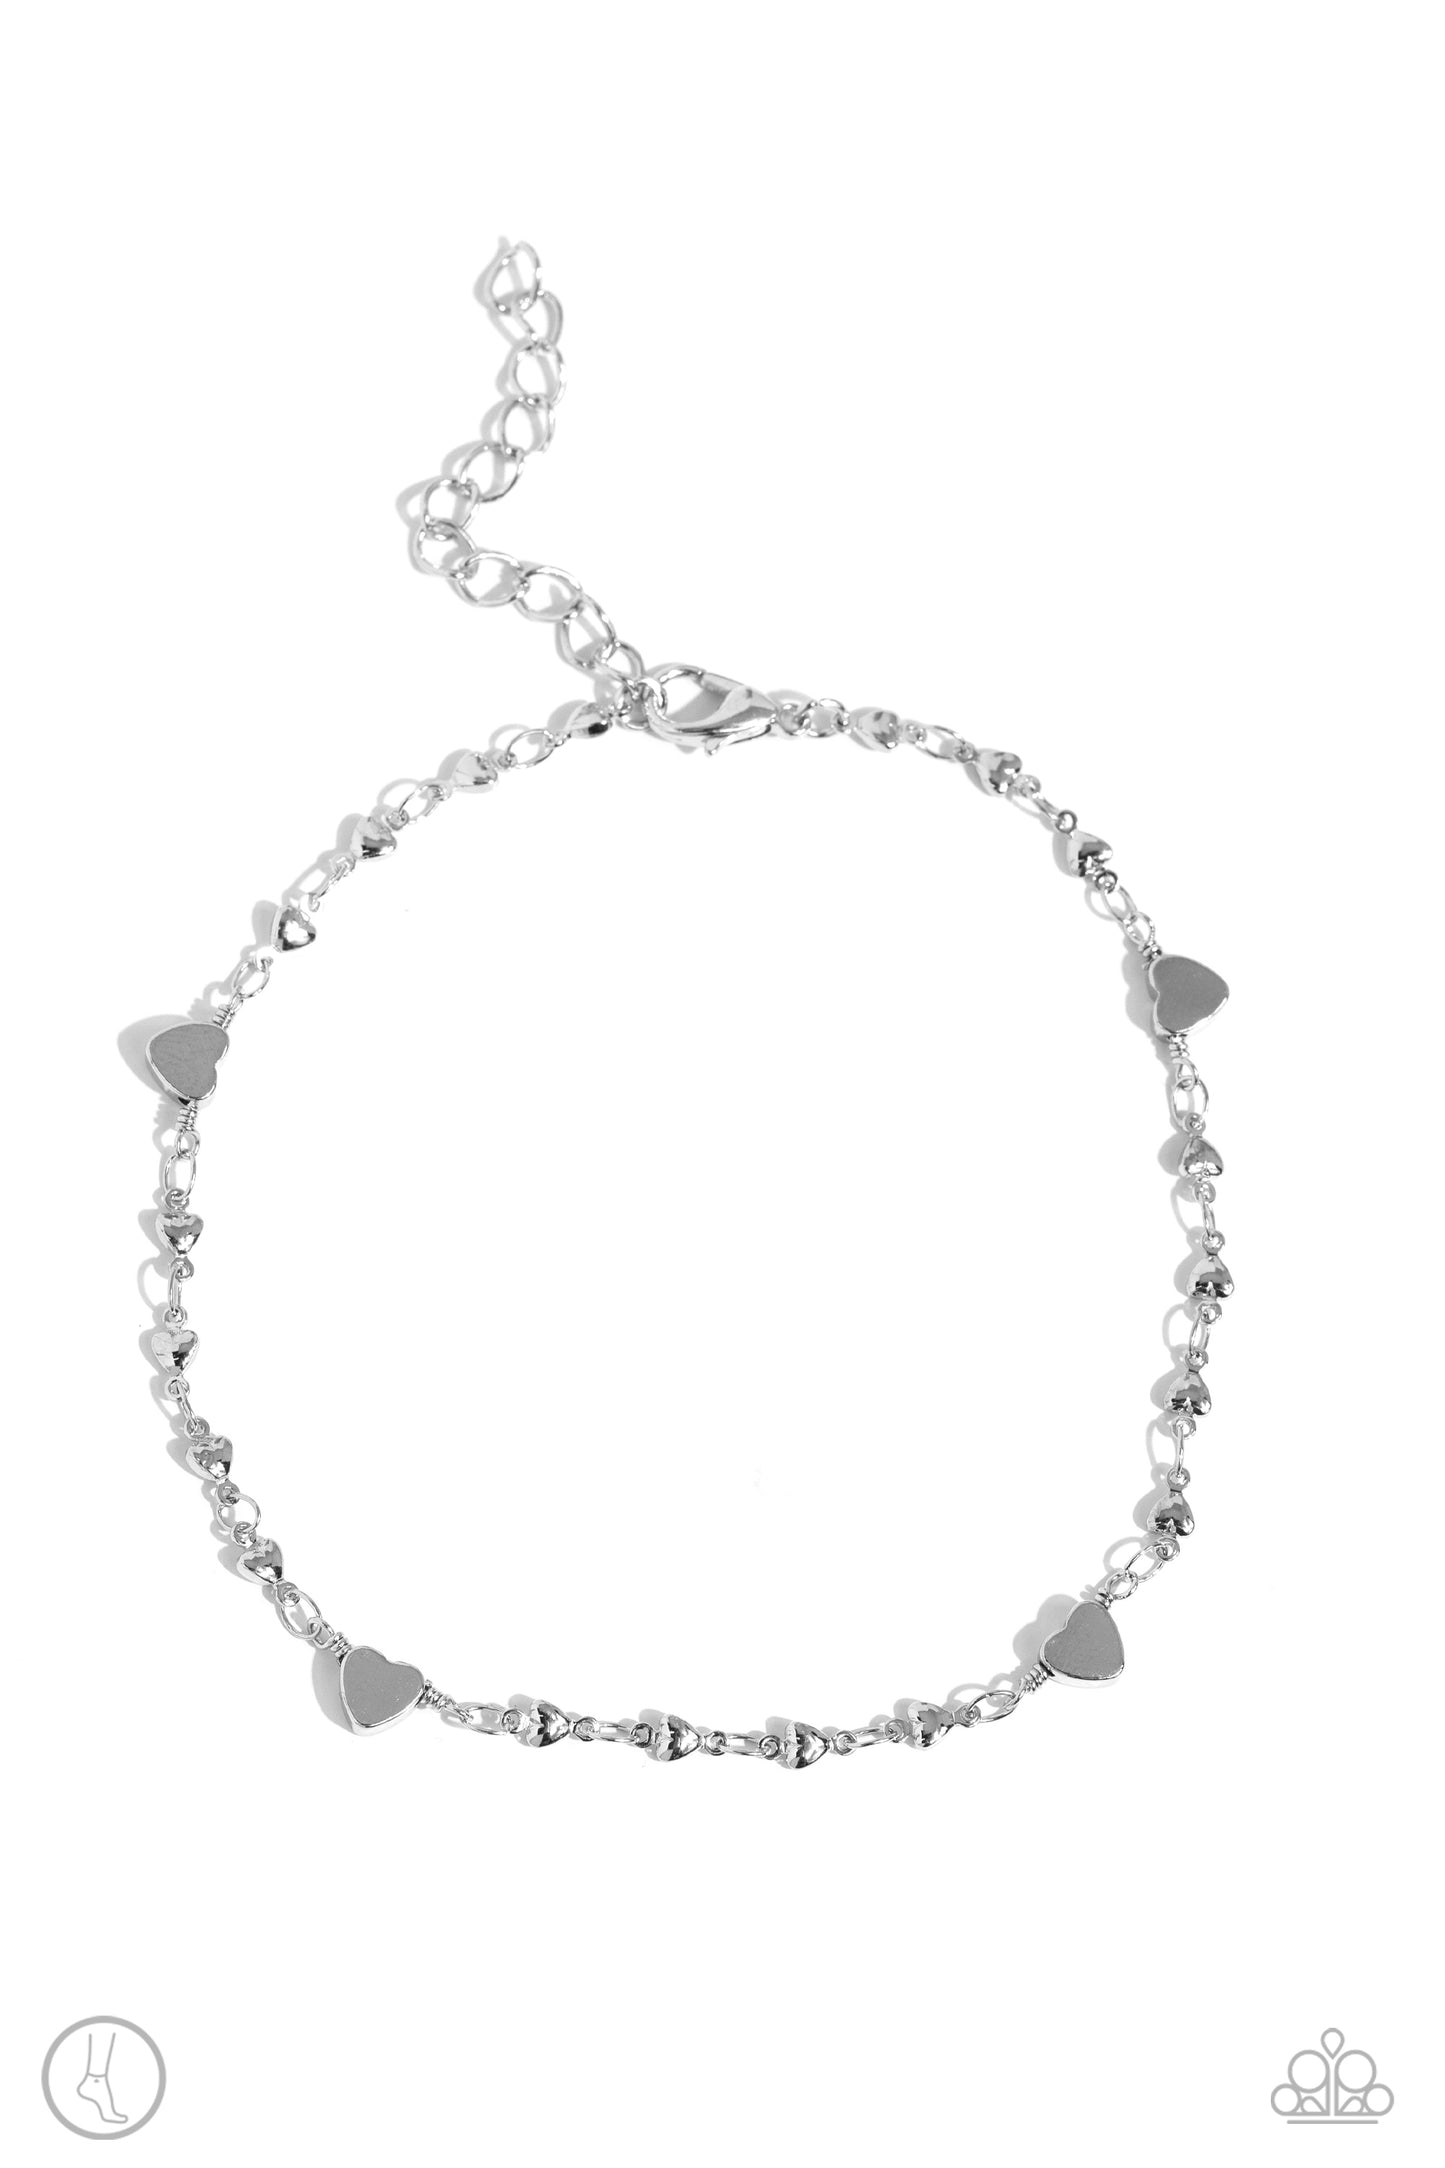 Highlighting My Heart - Silver Anklet